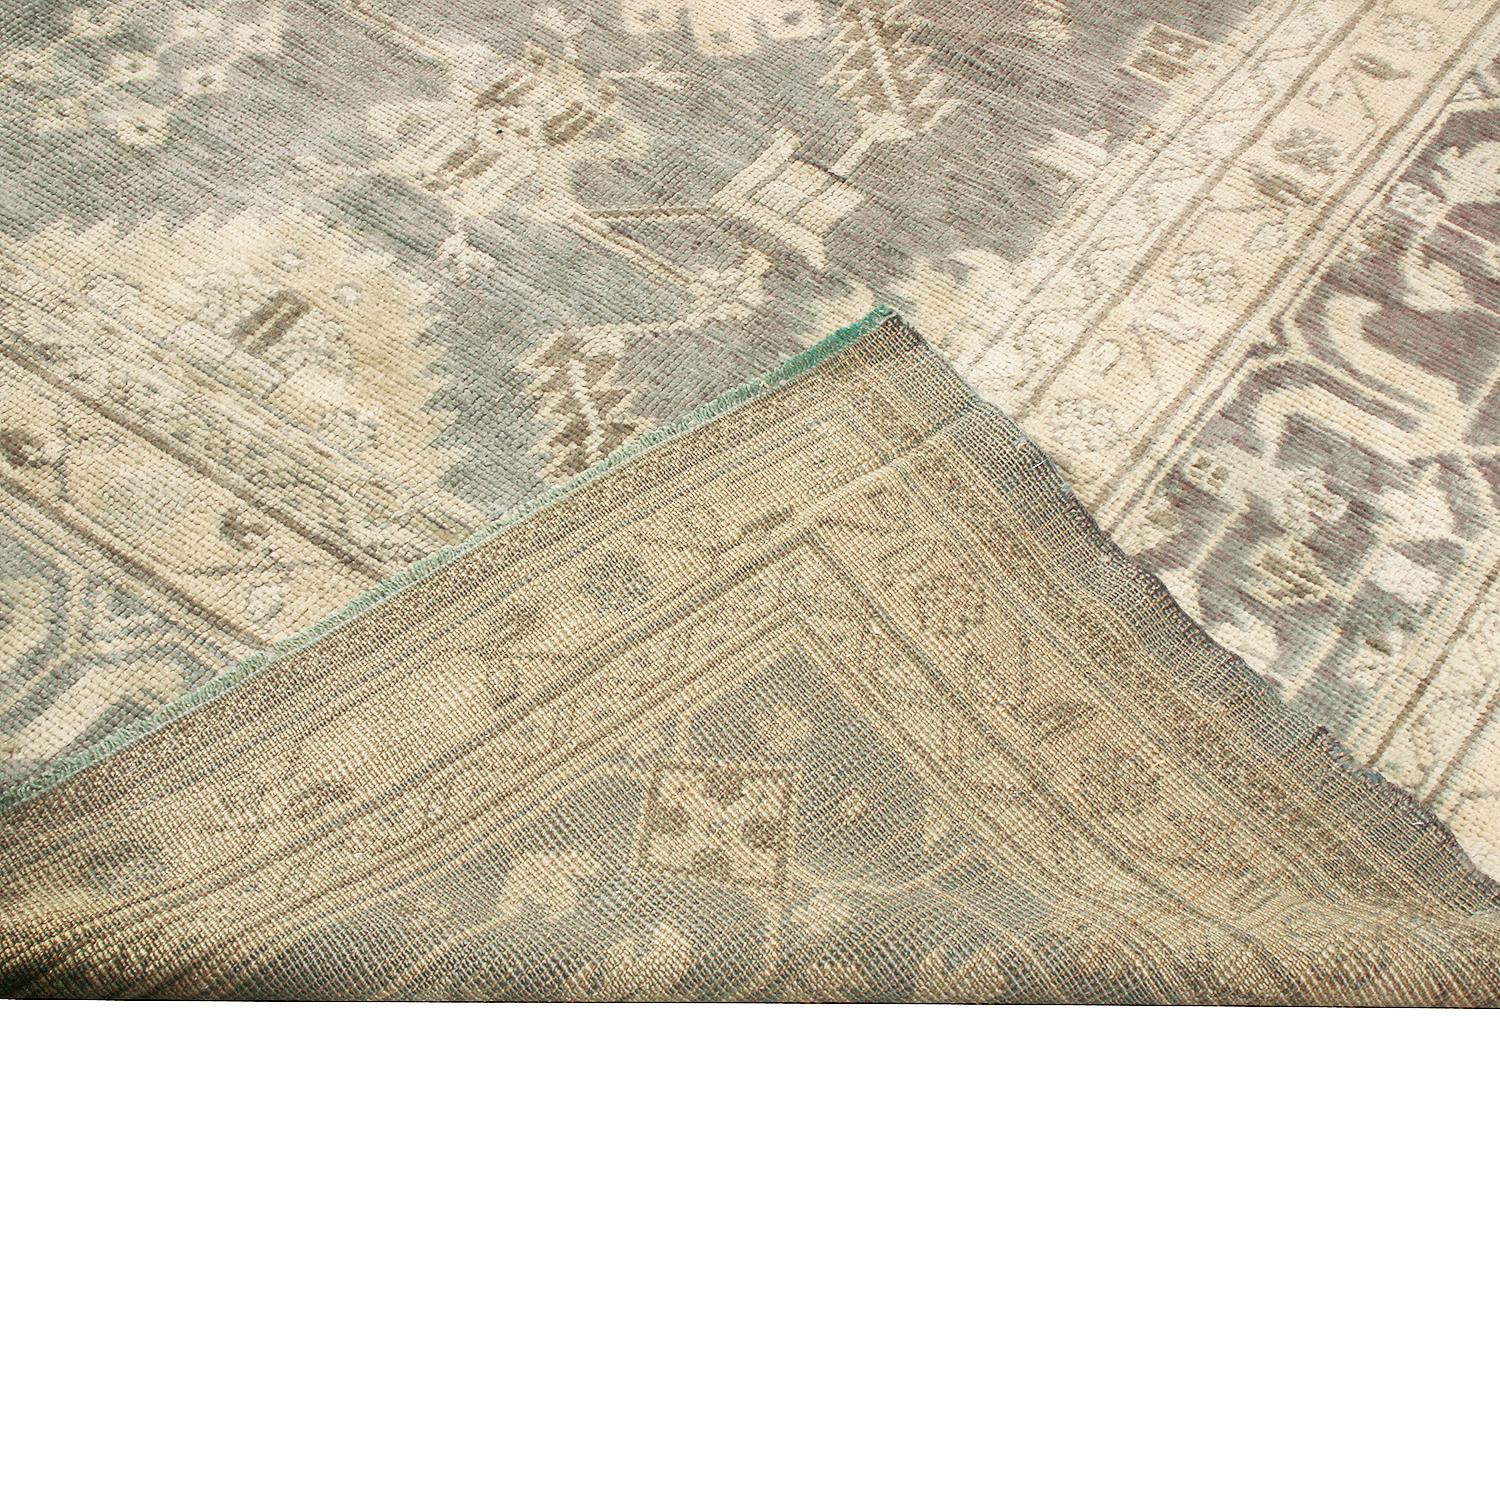 Late 19th Century Antique Oushak Stone Blue and Tan Wool Rug